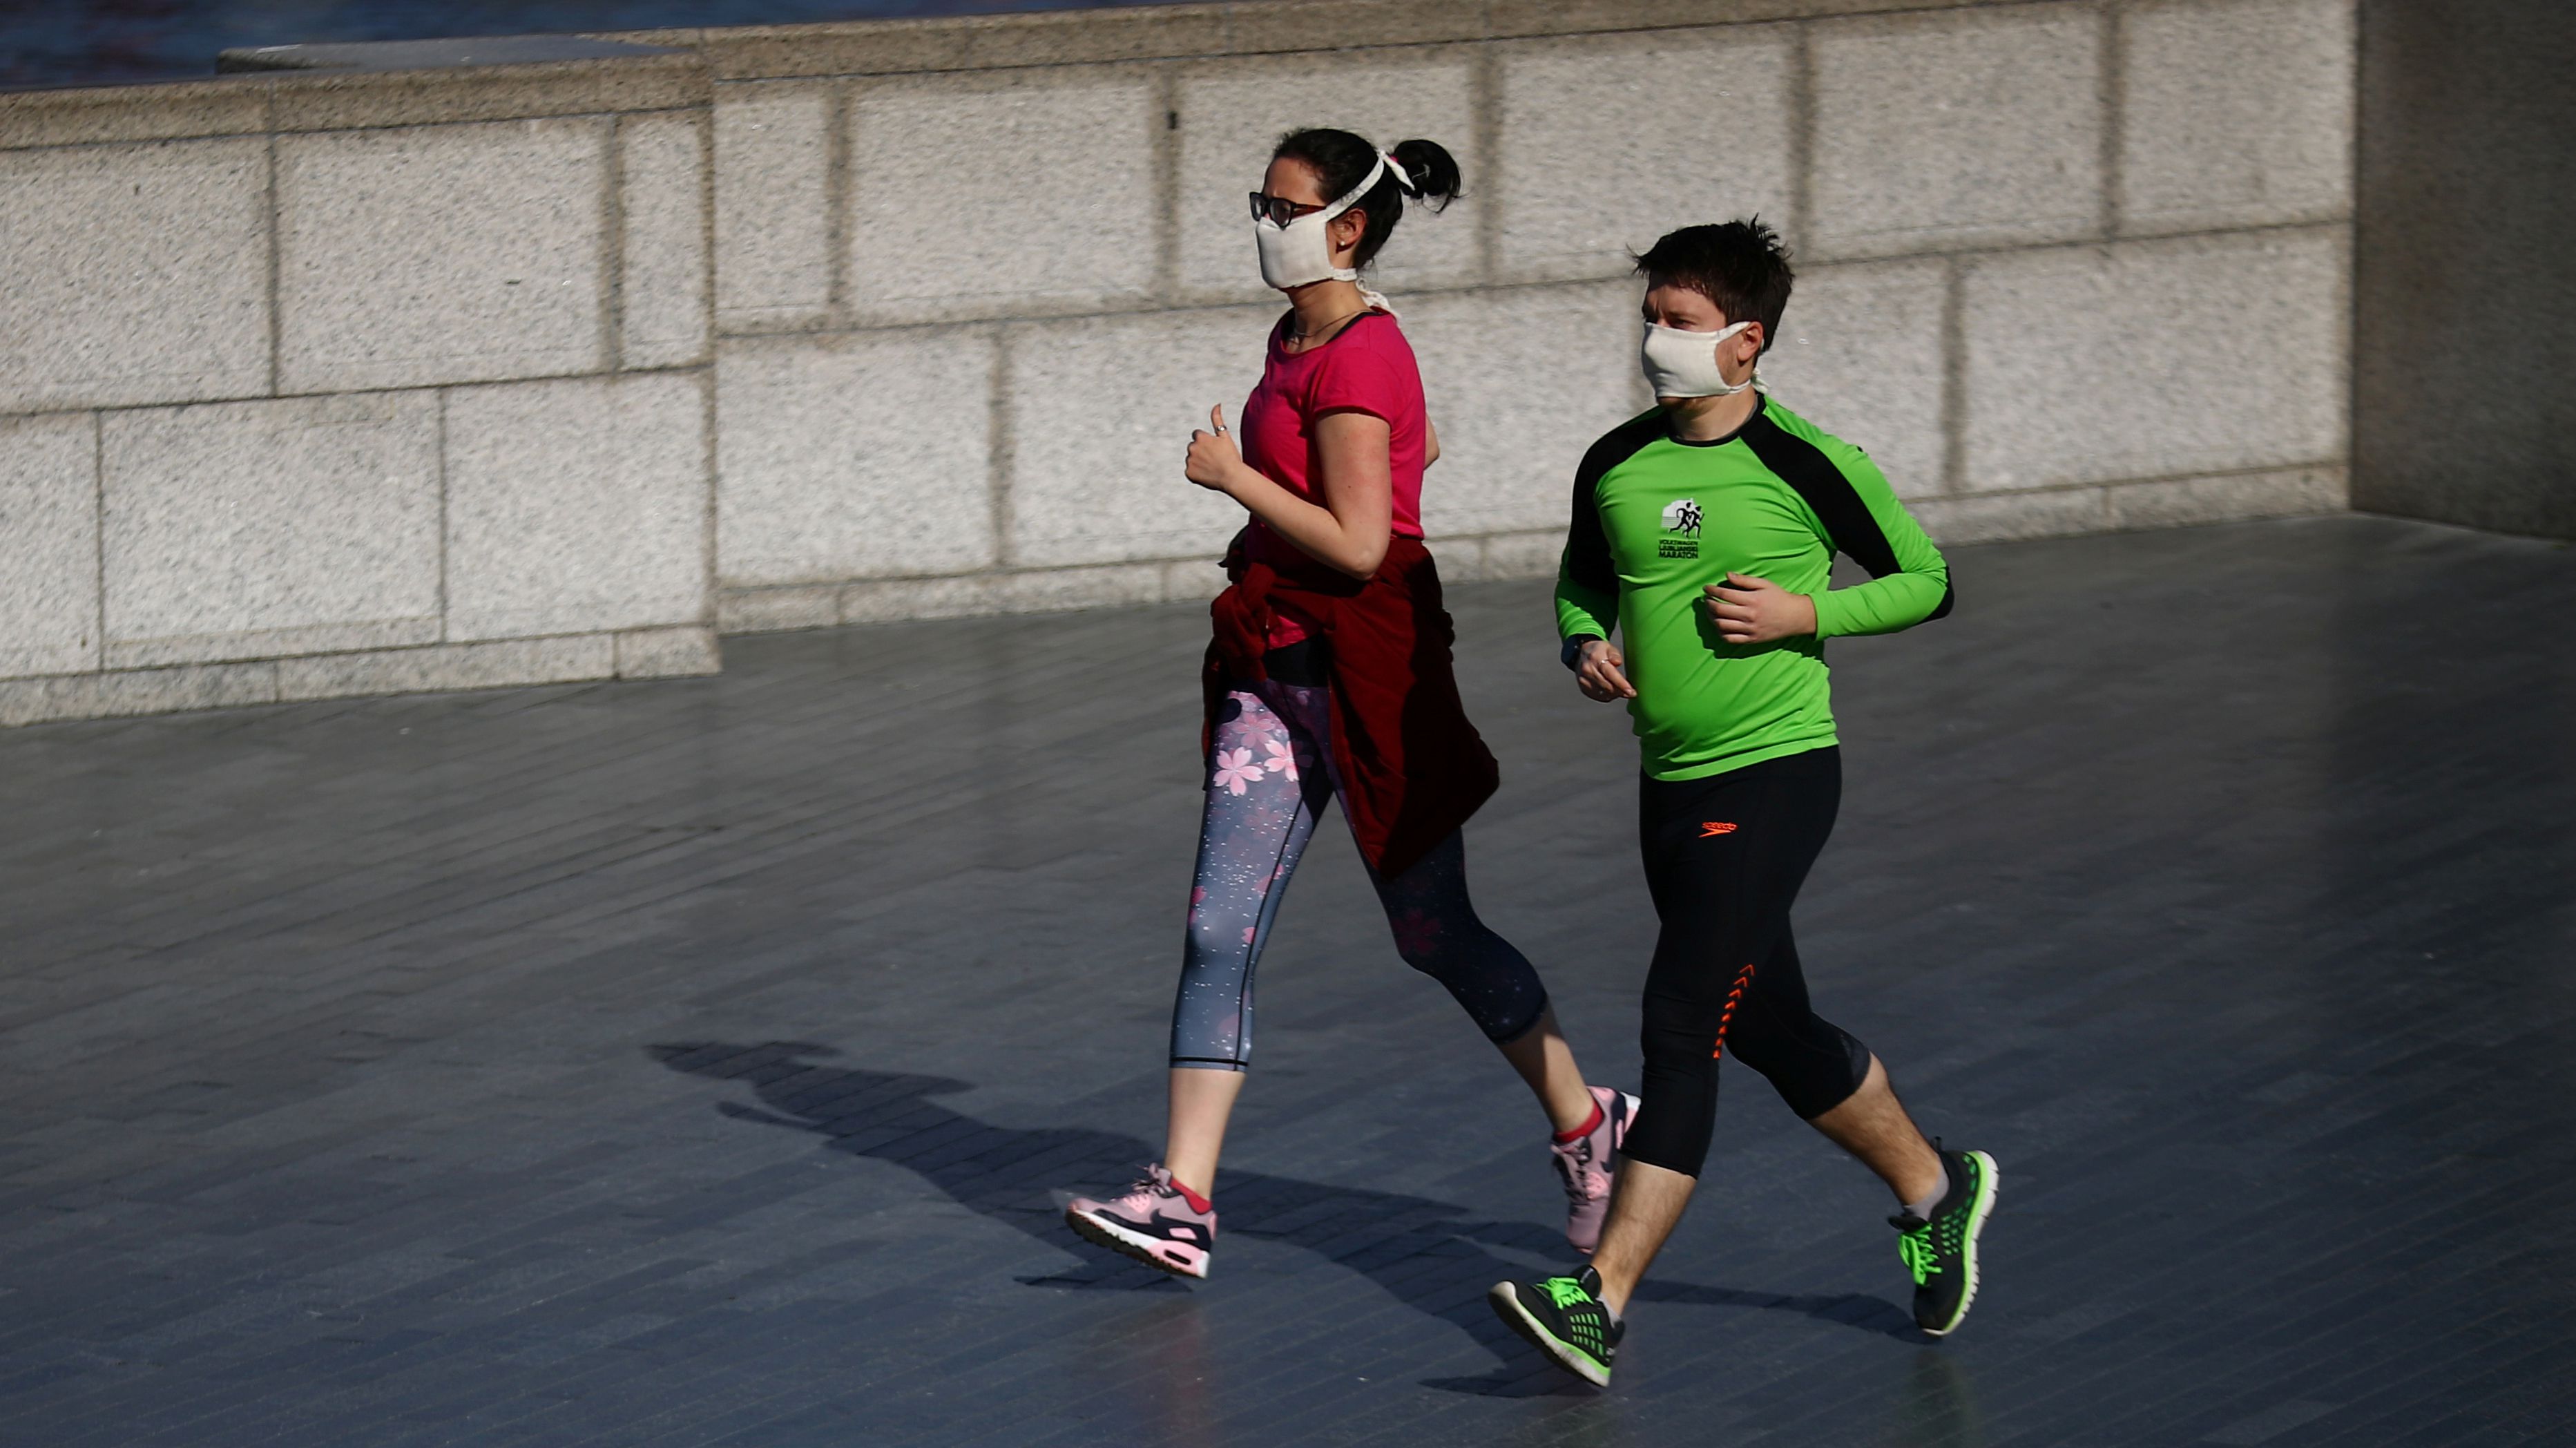 People jog wearing protective face masks by the River Thames, as the spread of the coronavirus disease (COVID-19) continues, London, Britain, March 24, 2020. REUTERS/Hannah McKay